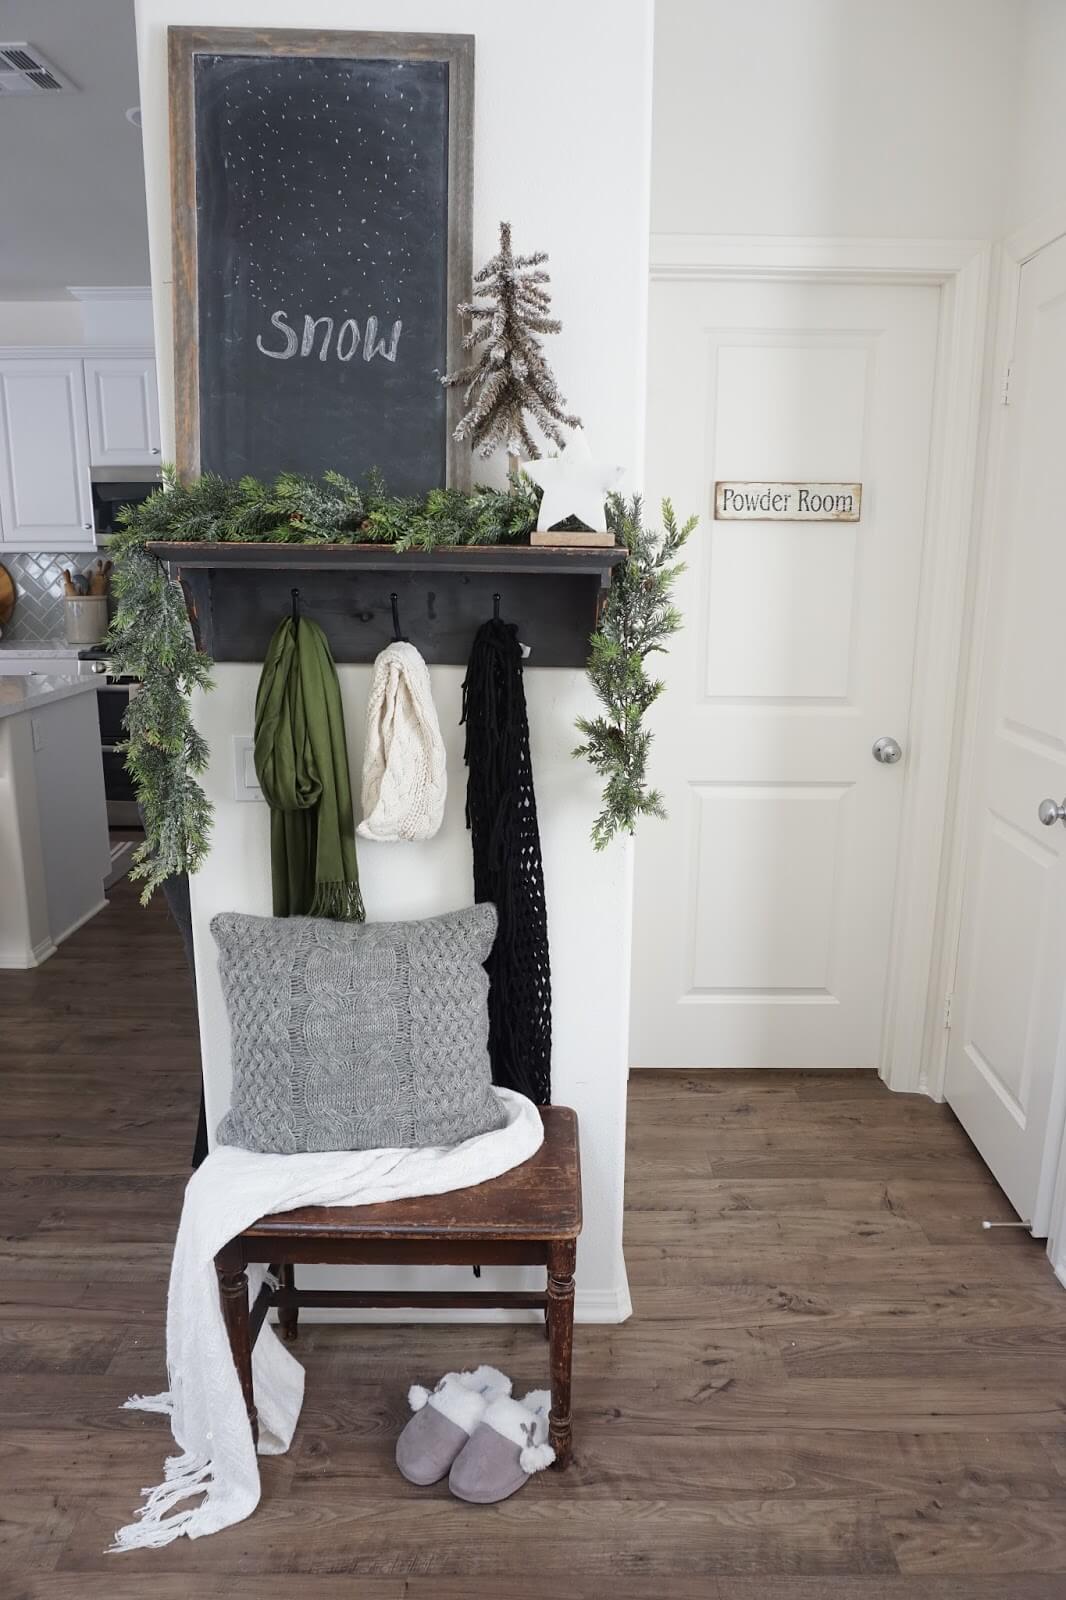 Wintery Corner with Chalkboard and Evergreen Garlands